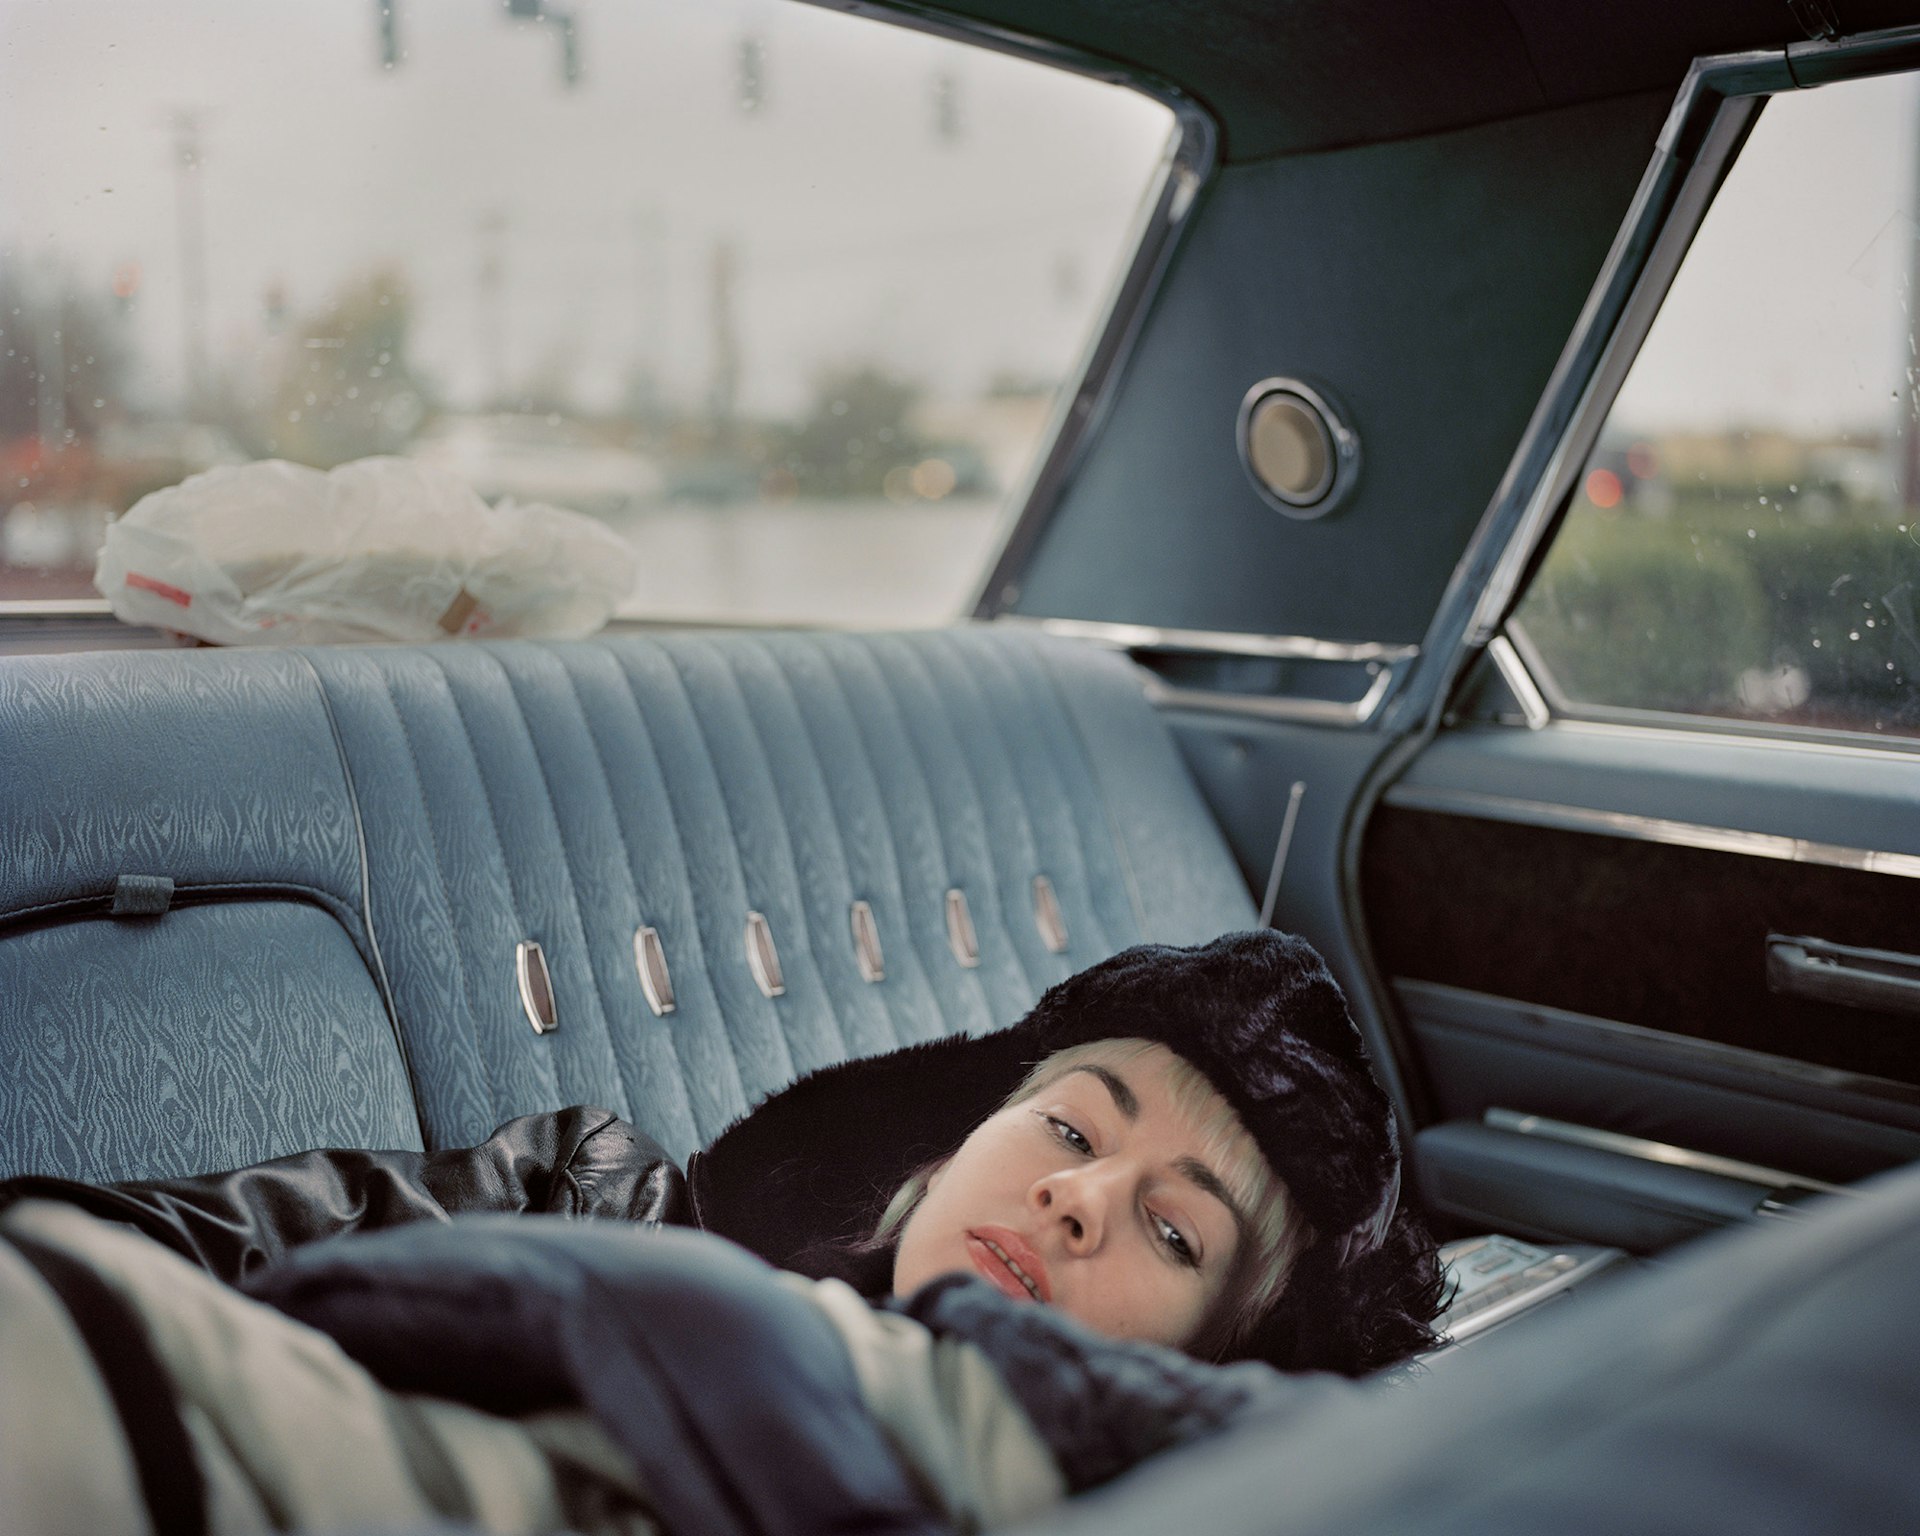 'Backseat' from Jenny Riffle's The Sound of Wind series